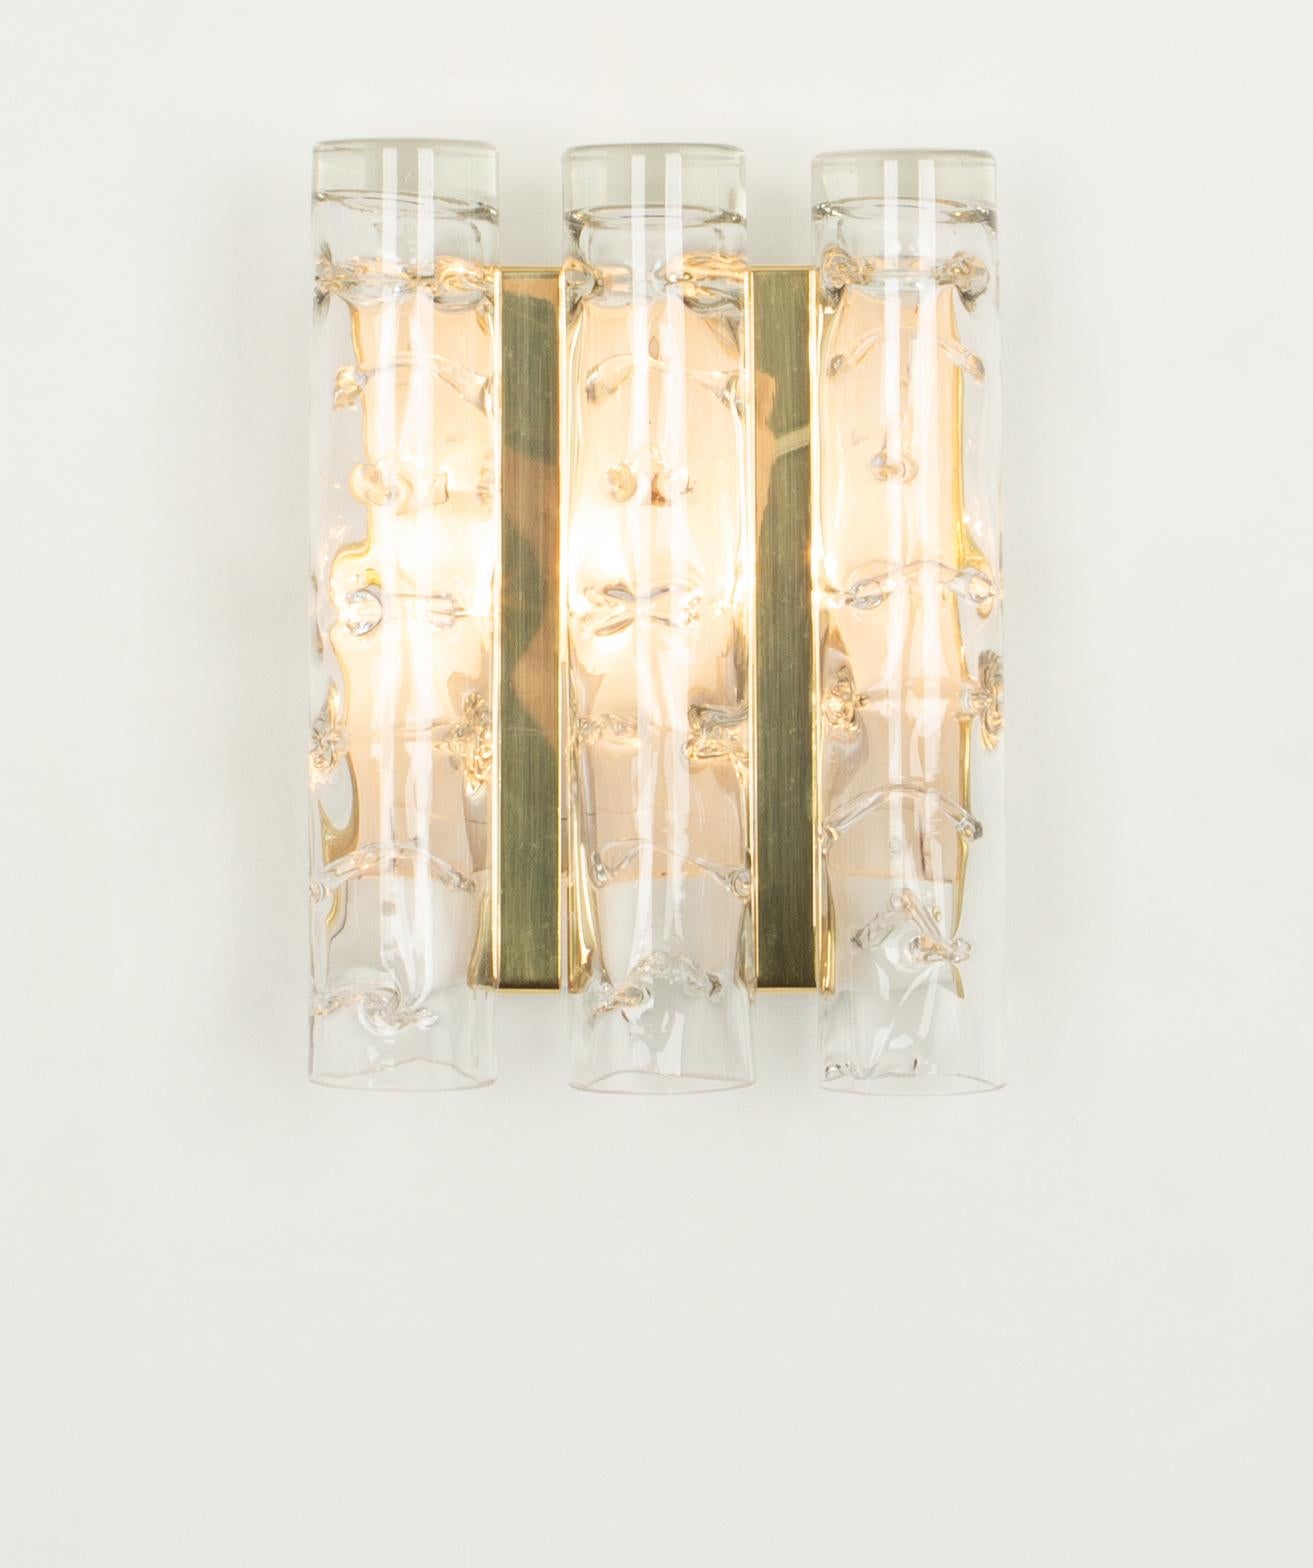 Large Brass Murano Glass Wall Sconce by Doria, Germany, 1960s For Sale 3